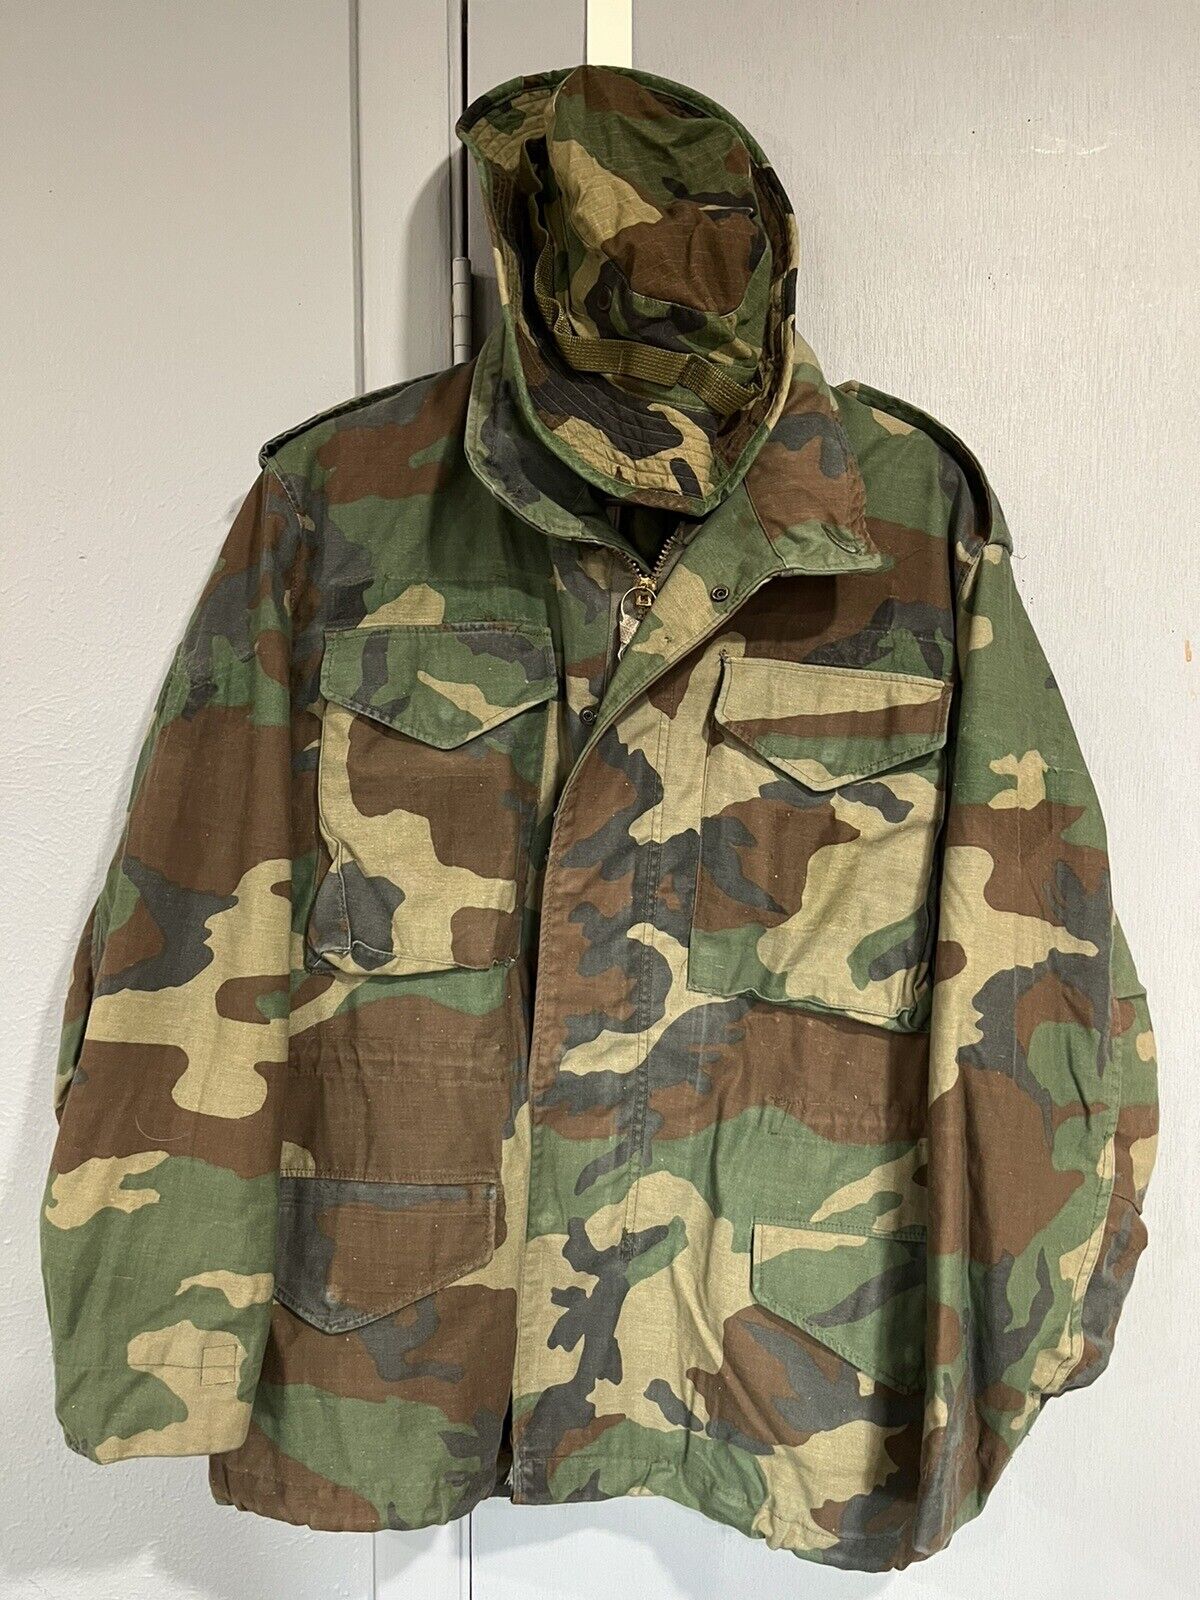 Vntg Army M65 Cold Weather Field Coat Woodland Camo Sz Small Short 1989 + Boonie